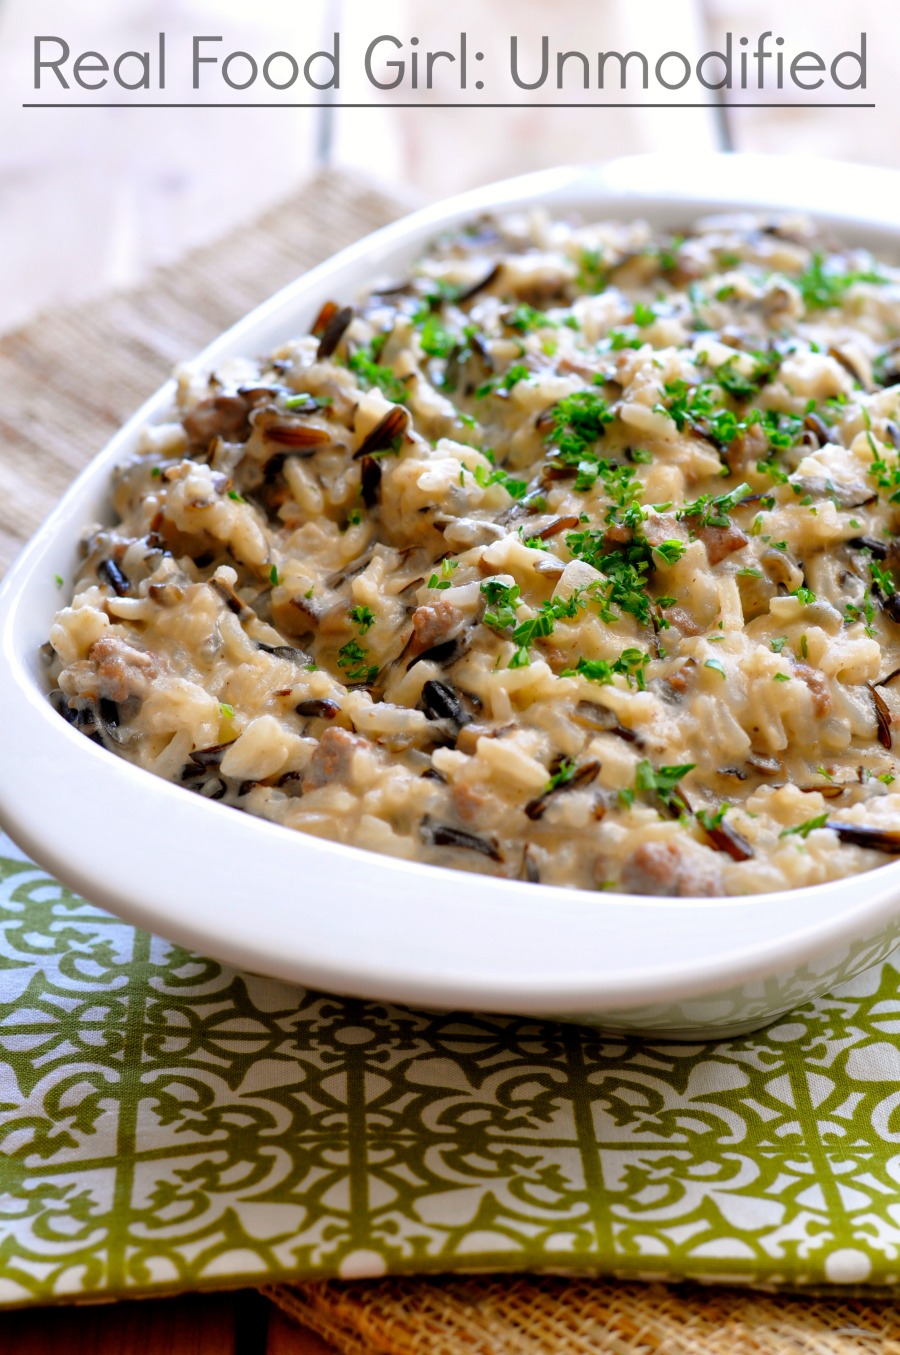 Wild Rice Hotdish- A recipe remake by Real Food Girl: Unmodified. Tasty wild rice, ground beef, mushrooms, creamy sauce...